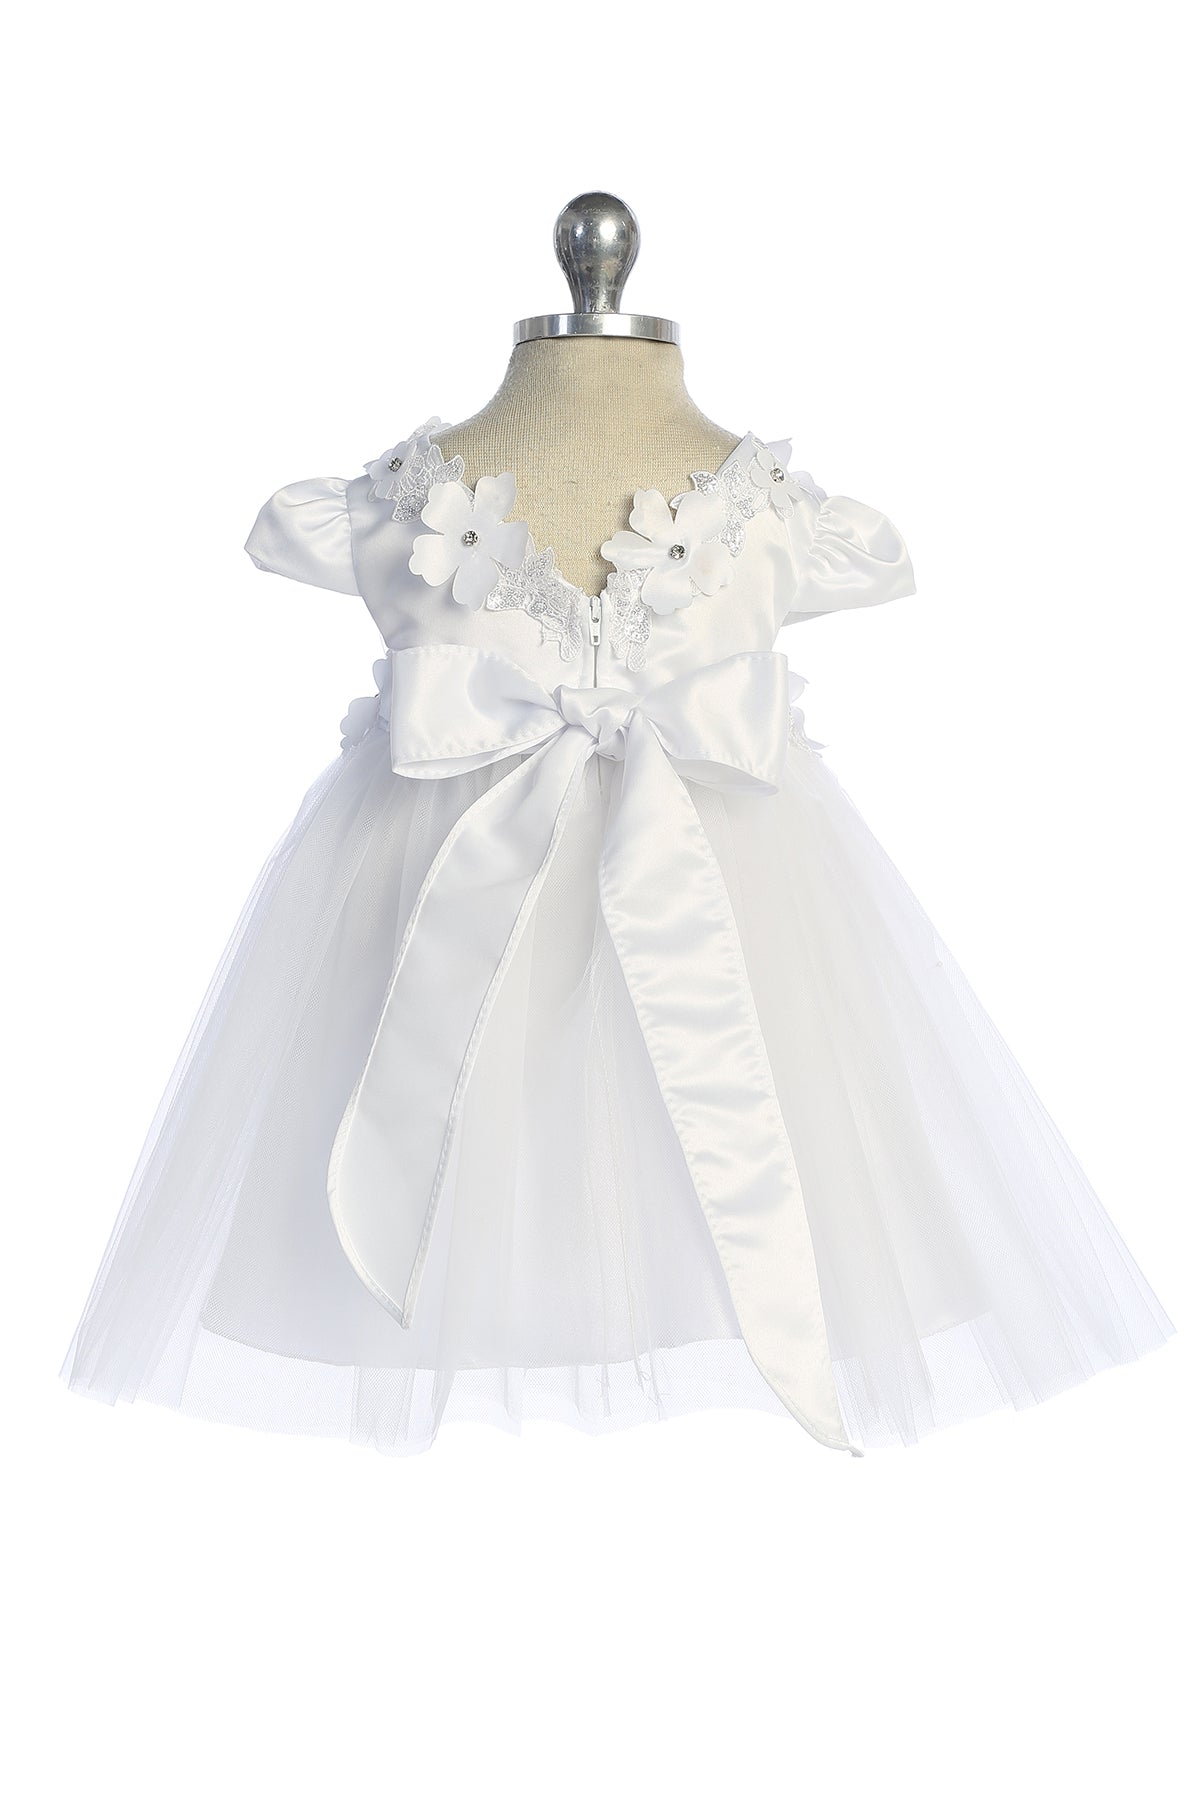 562B Capped Sleeve Satin & Tulle Baby Dress with Floral Trim